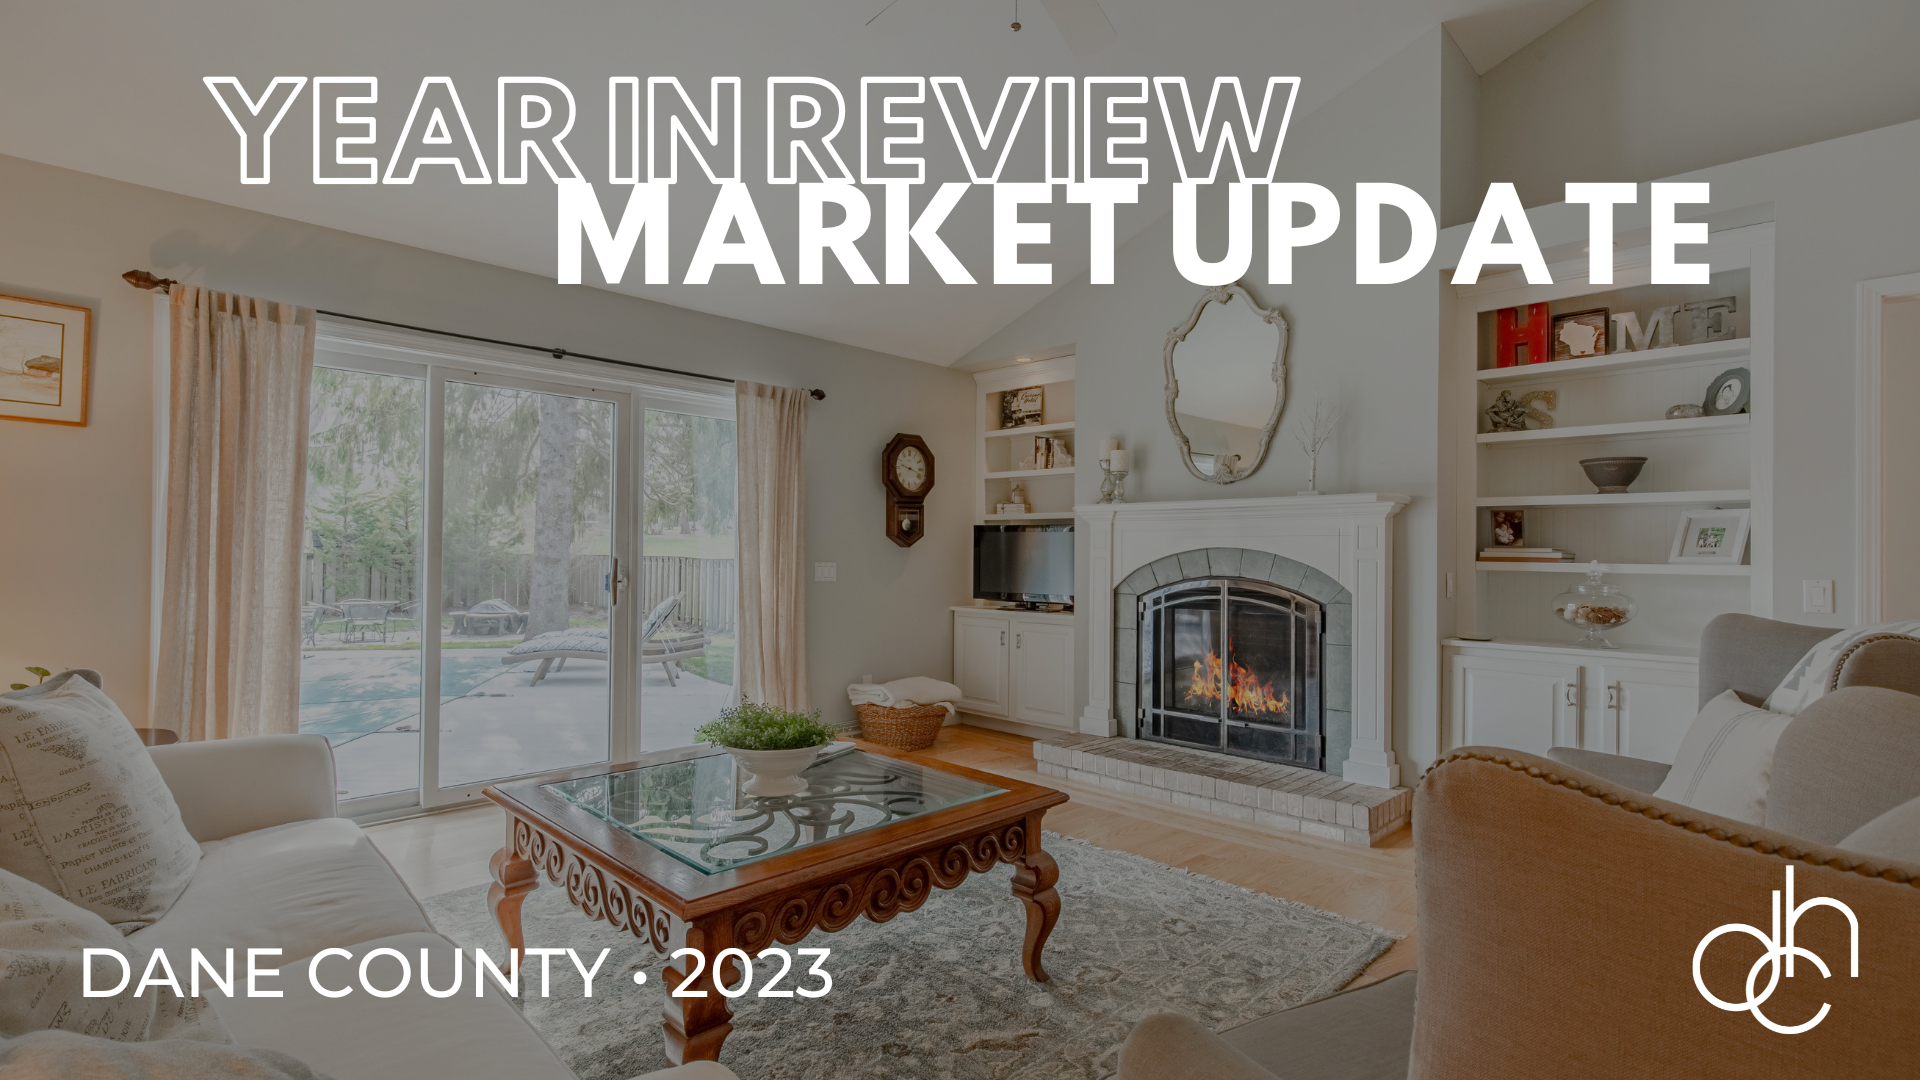 Dane County Year in Review Market Update 2023